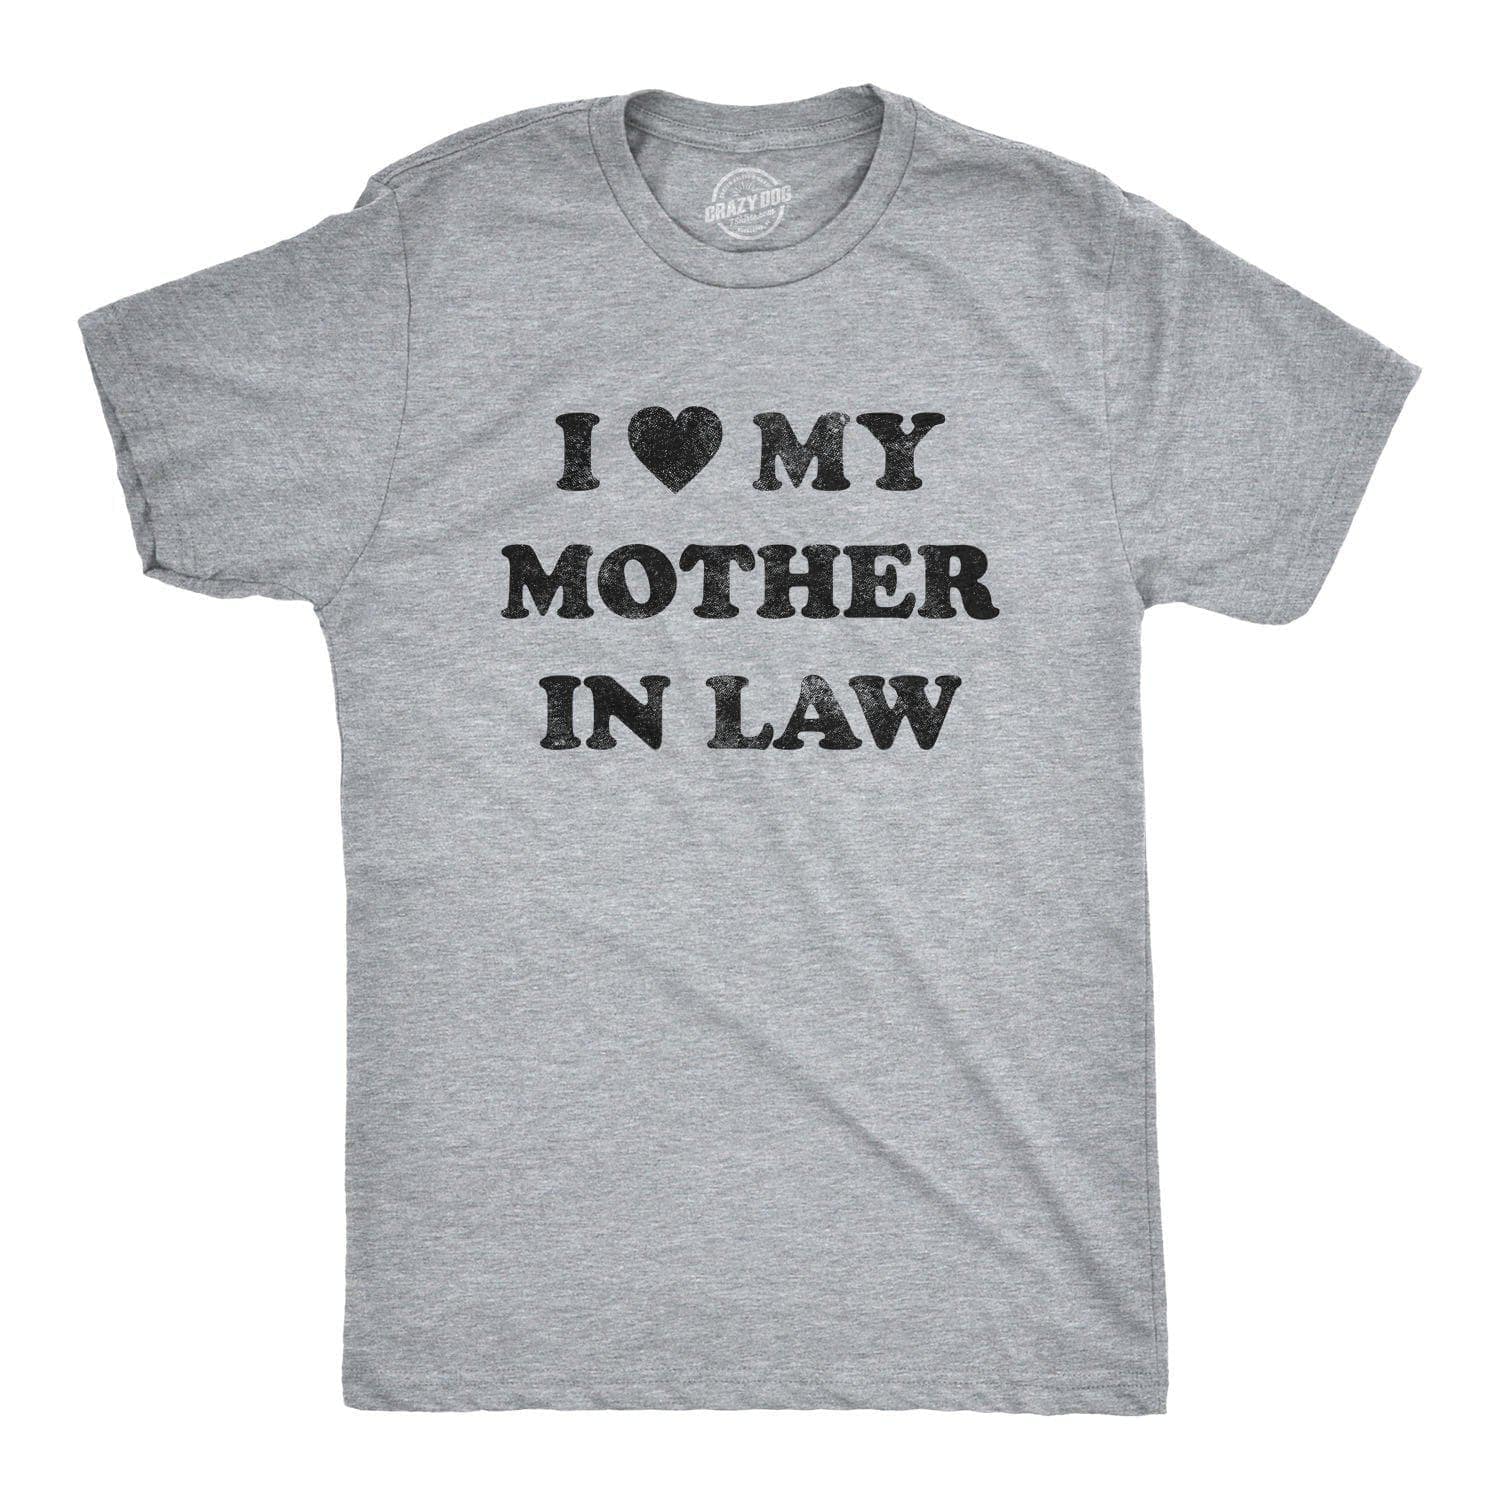 I Love My Mother In Law Men's Tshirt  -  Crazy Dog T-Shirts